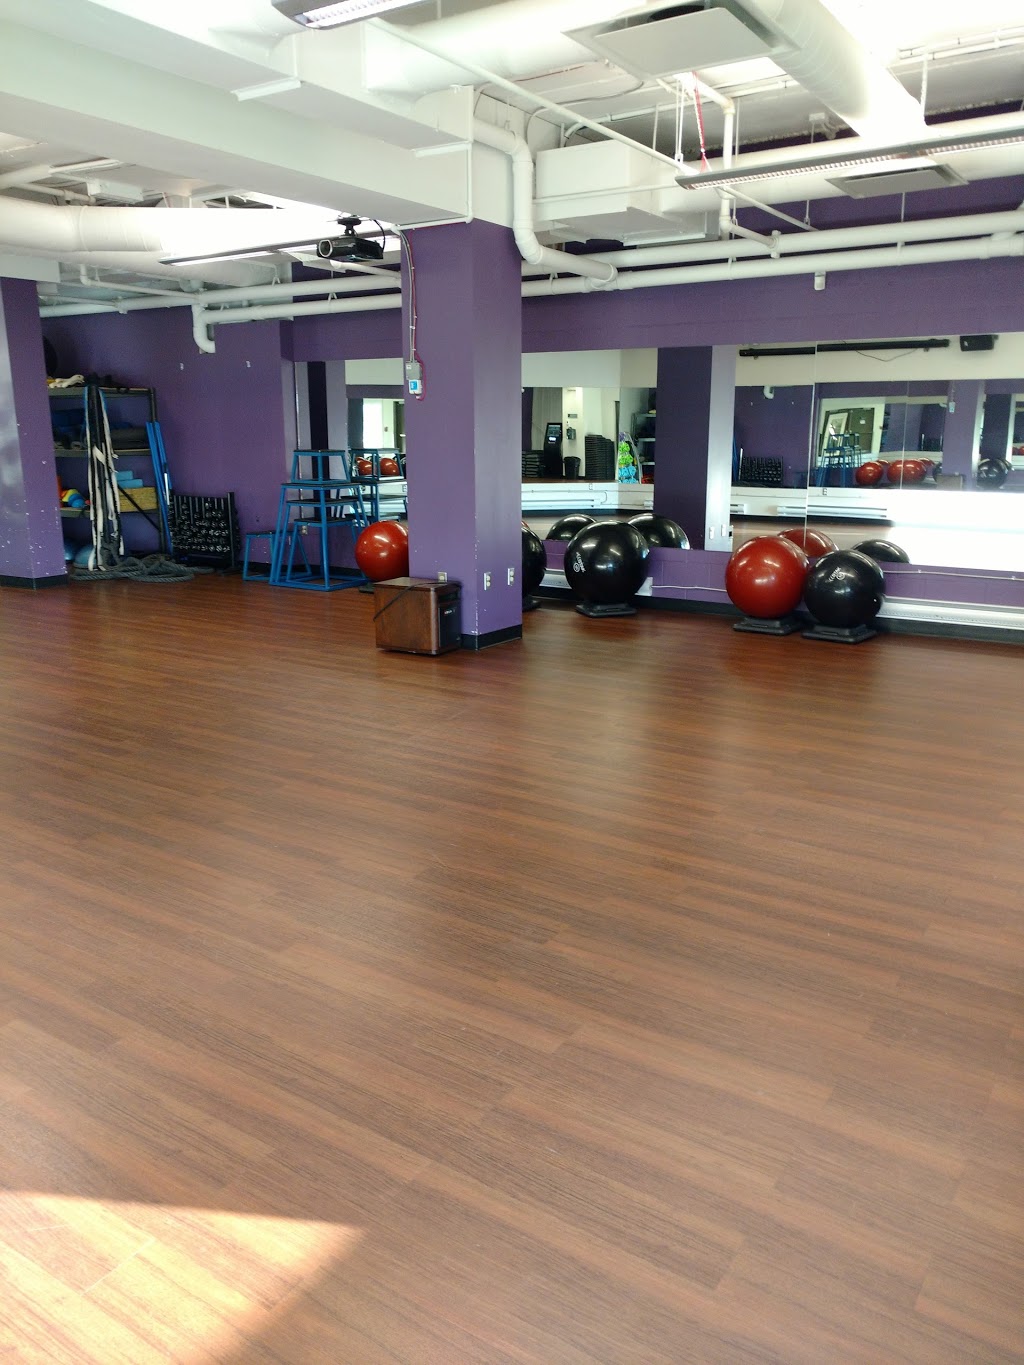 Anytime Fitness | 701 Centennial Blvd N, Warman, SK S0K 4S0, Canada | Phone: (306) 242-4945